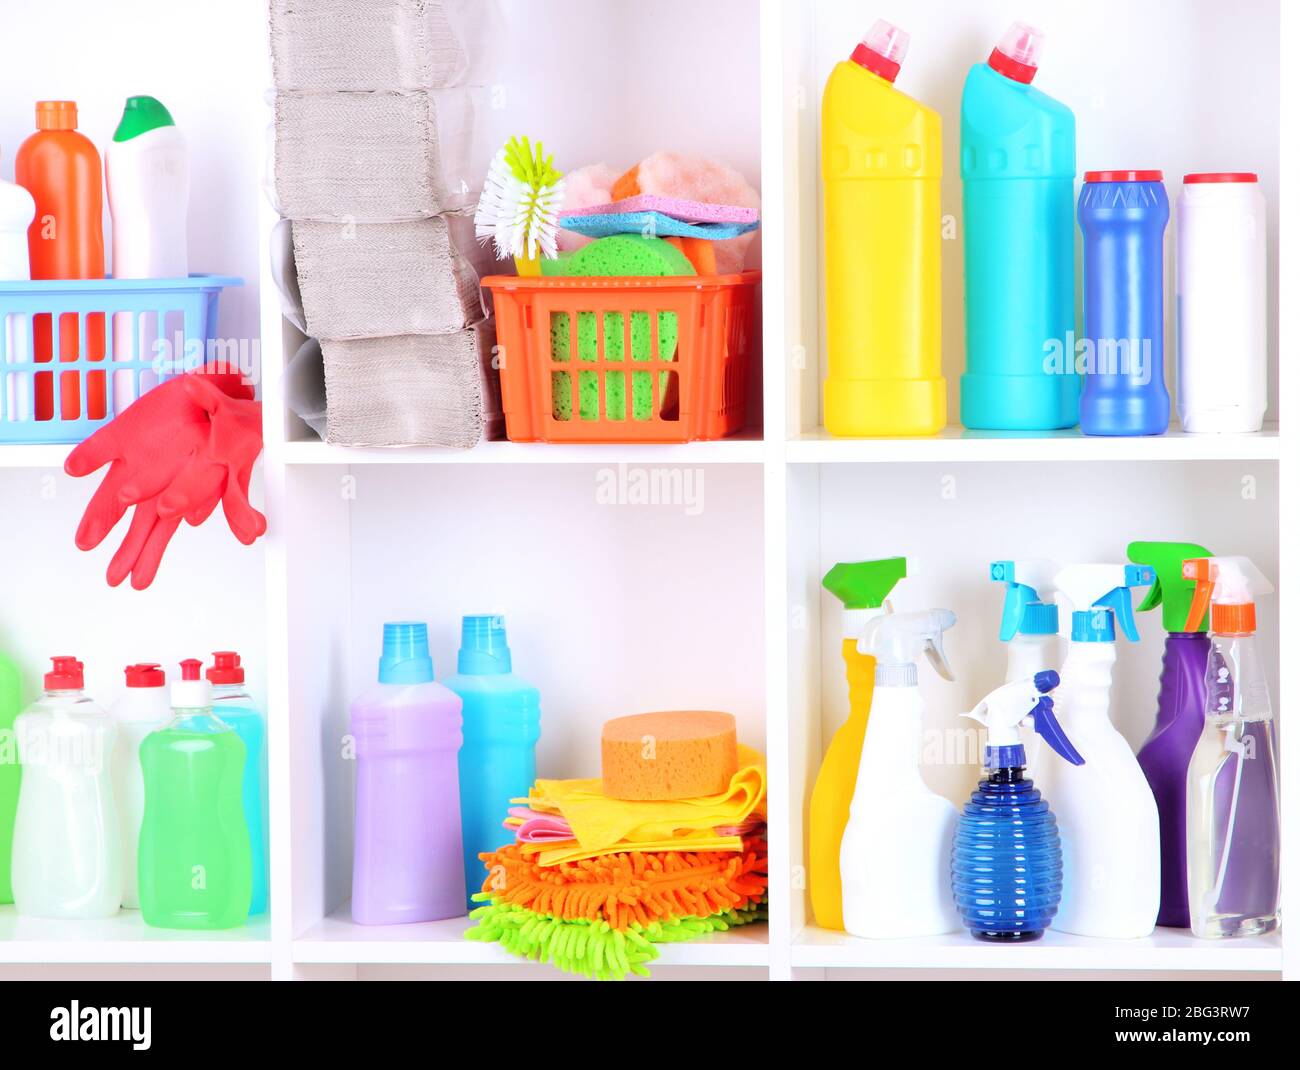 Storage Room for Cleaning Equipment Stock Photo - Alamy